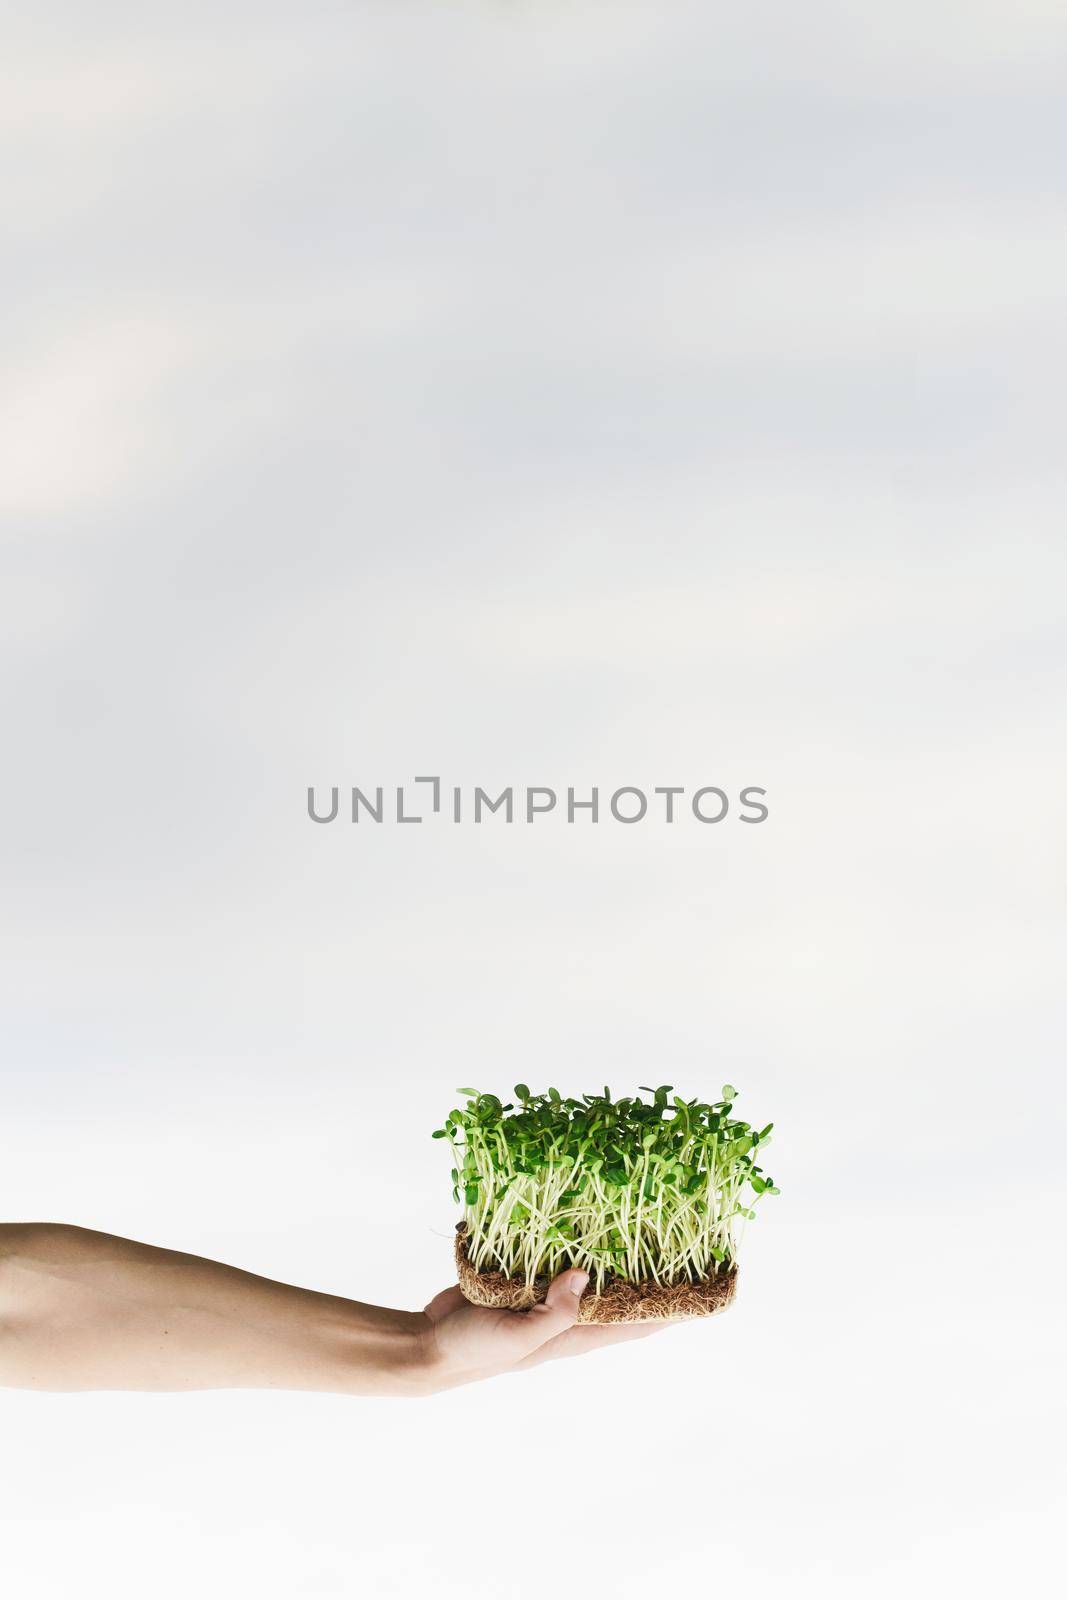 Microgreen with soil in hands closeup. Man holds green microgreen of sunflower seeds in hands. Idea for healthy vegan food delivery service